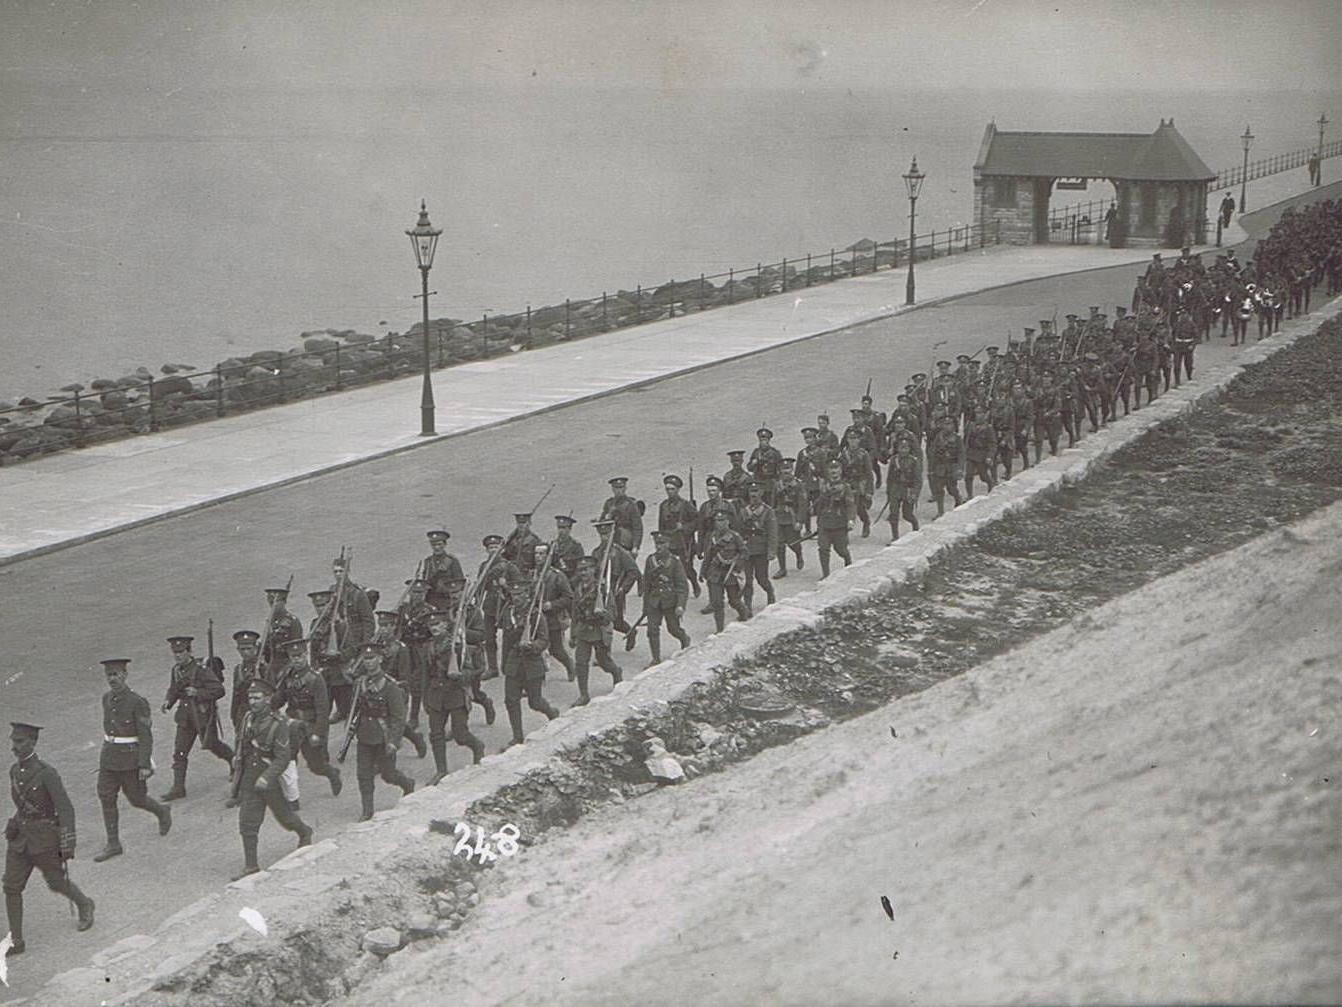 The 5th Territorial Force Battalion, marching along Marine Drive, during Annual Camp, Scarborough, 1912